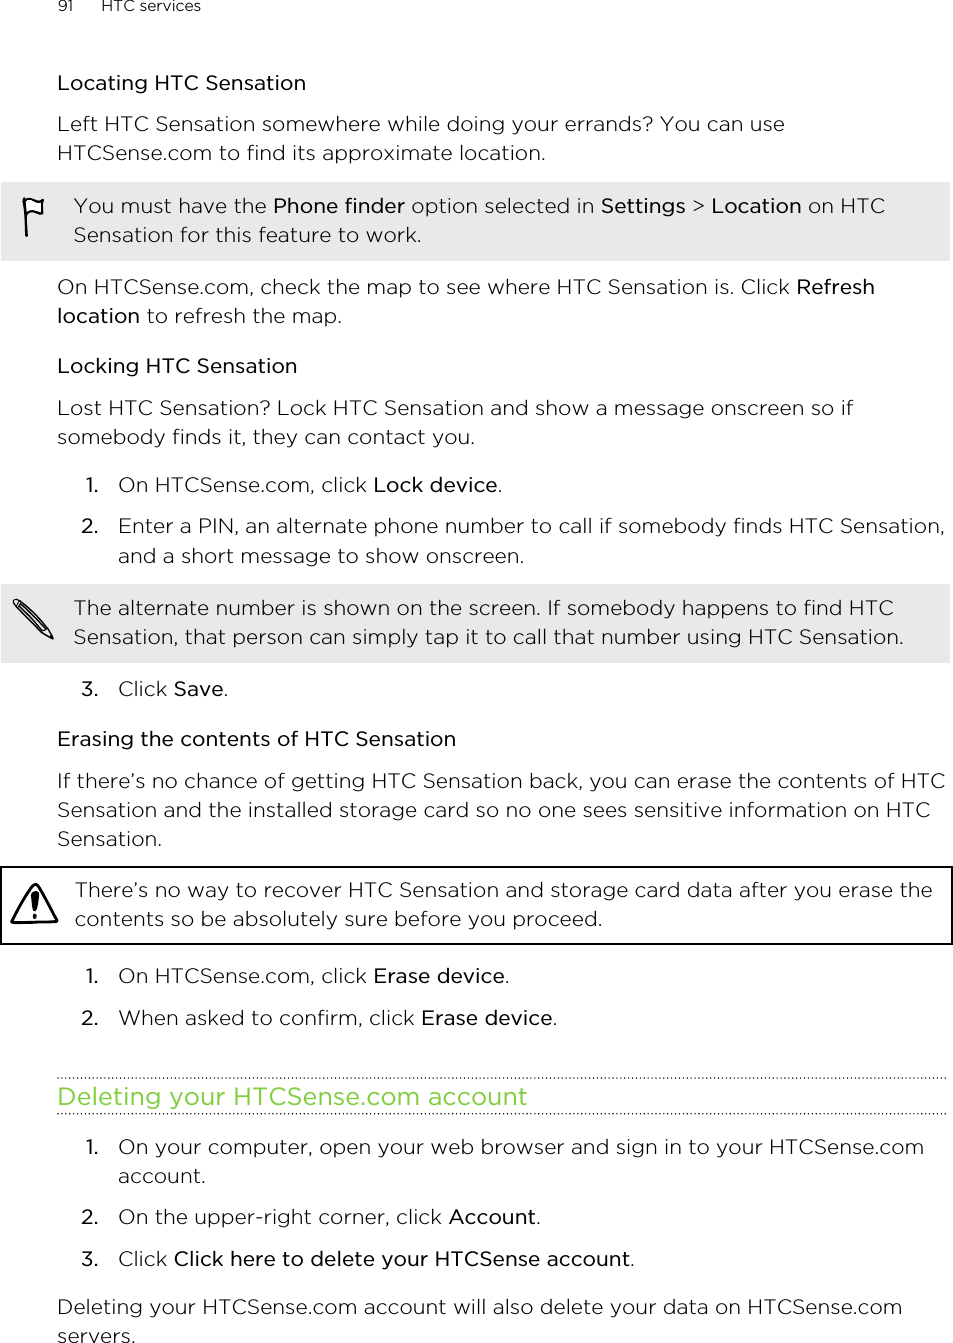 Locating HTC SensationLeft HTC Sensation somewhere while doing your errands? You can useHTCSense.com to find its approximate location.You must have the Phone finder option selected in Settings &gt; Location on HTCSensation for this feature to work.On HTCSense.com, check the map to see where HTC Sensation is. Click Refreshlocation to refresh the map.Locking HTC SensationLost HTC Sensation? Lock HTC Sensation and show a message onscreen so ifsomebody finds it, they can contact you.1. On HTCSense.com, click Lock device.2. Enter a PIN, an alternate phone number to call if somebody finds HTC Sensation,and a short message to show onscreen. The alternate number is shown on the screen. If somebody happens to find HTCSensation, that person can simply tap it to call that number using HTC Sensation.3. Click Save.Erasing the contents of HTC SensationIf there’s no chance of getting HTC Sensation back, you can erase the contents of HTCSensation and the installed storage card so no one sees sensitive information on HTCSensation.There’s no way to recover HTC Sensation and storage card data after you erase thecontents so be absolutely sure before you proceed.1. On HTCSense.com, click Erase device.2. When asked to confirm, click Erase device.Deleting your HTCSense.com account1. On your computer, open your web browser and sign in to your HTCSense.comaccount.2. On the upper-right corner, click Account.3. Click Click here to delete your HTCSense account.Deleting your HTCSense.com account will also delete your data on HTCSense.comservers.91 HTC services